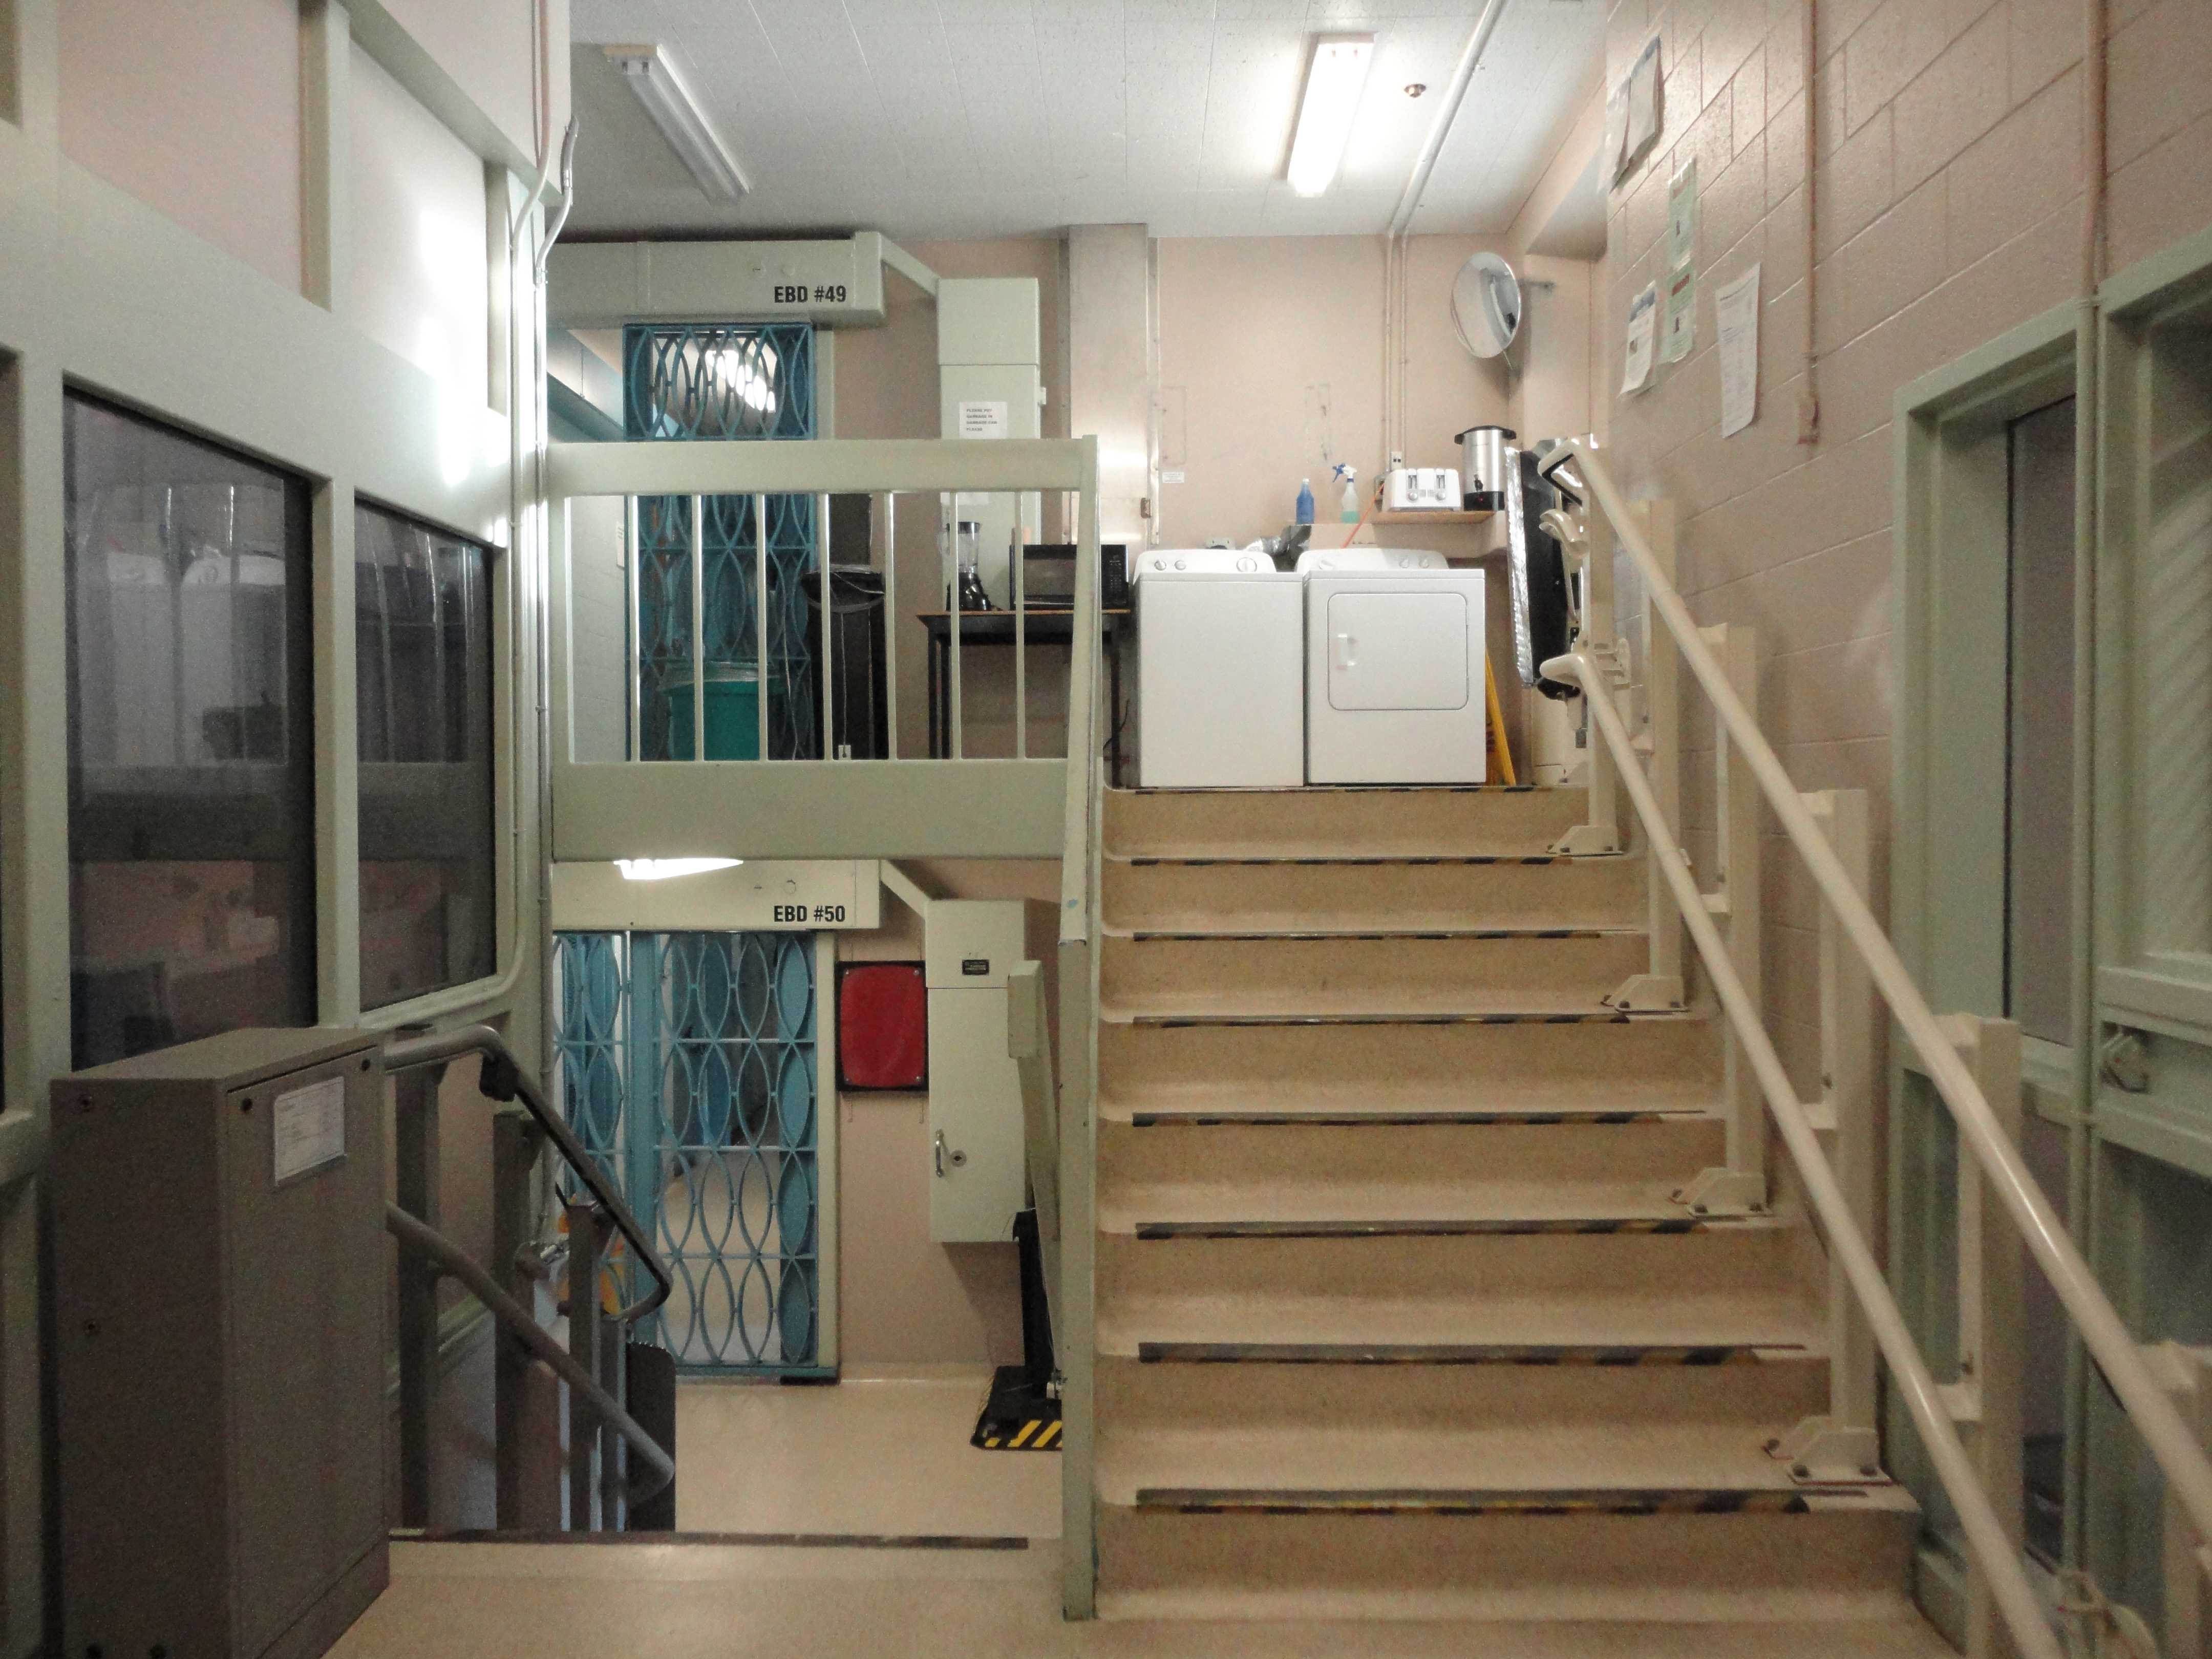 Photo of the split entrance to the Therapeutic Range at Atlantic Institution